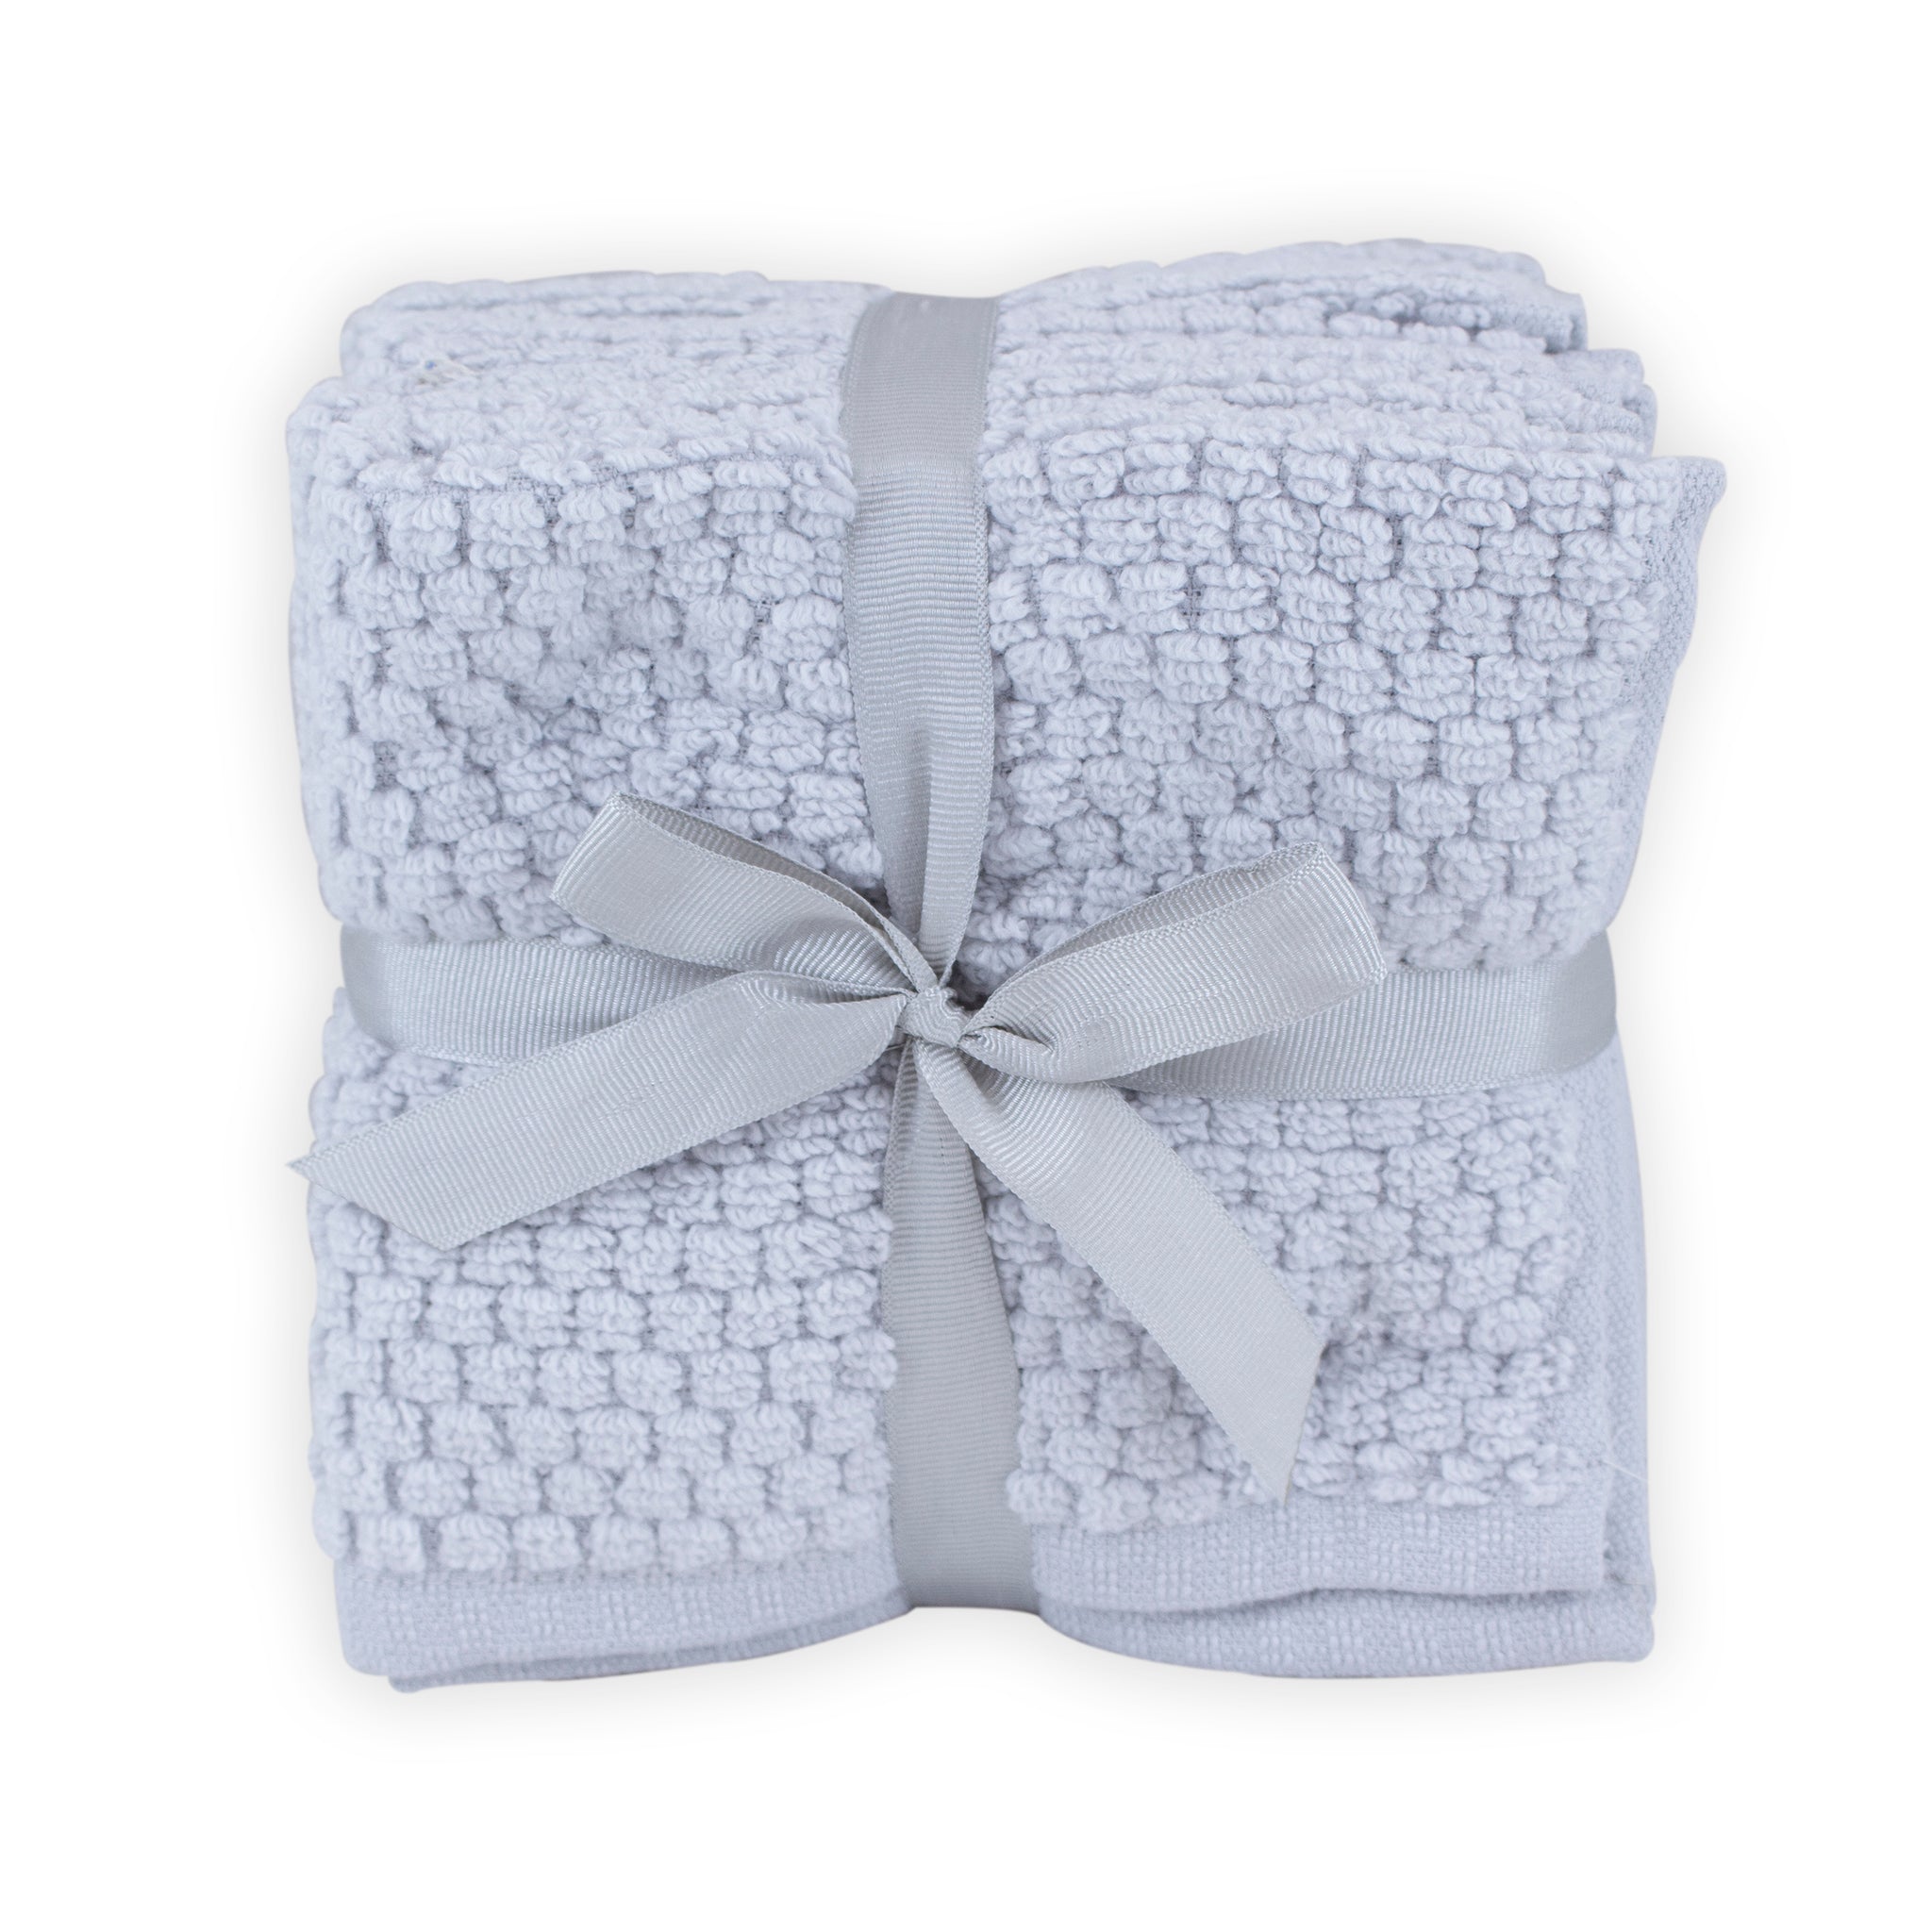 White and Gray Wash Cloth